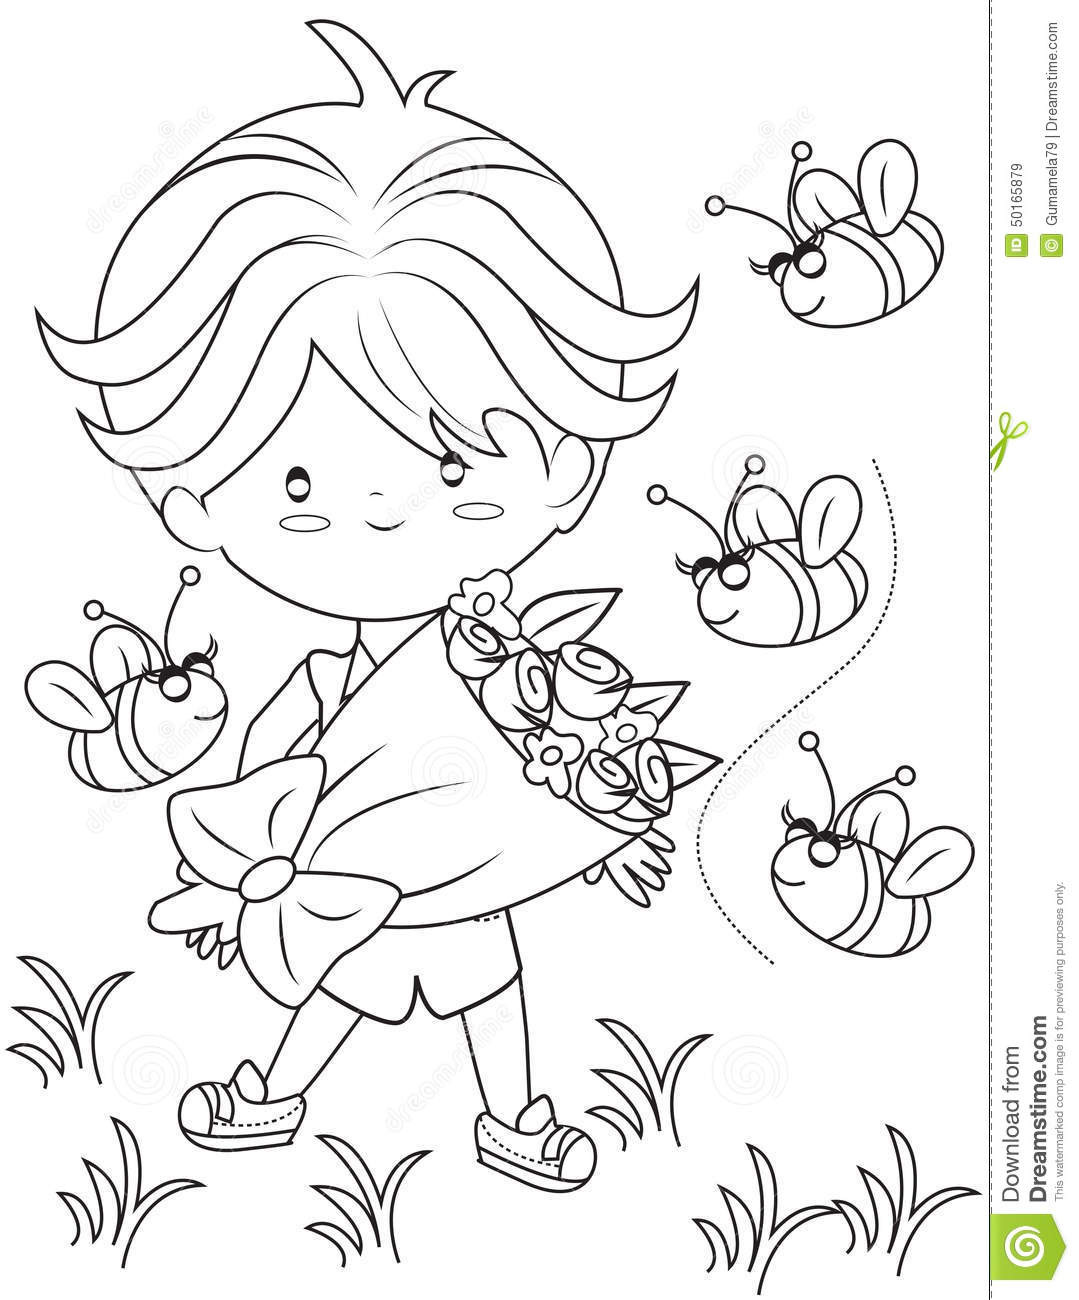 Coloring Pages Of Roses For Boys
 Boy With A Bouquet Flowers Coloring Page Stock